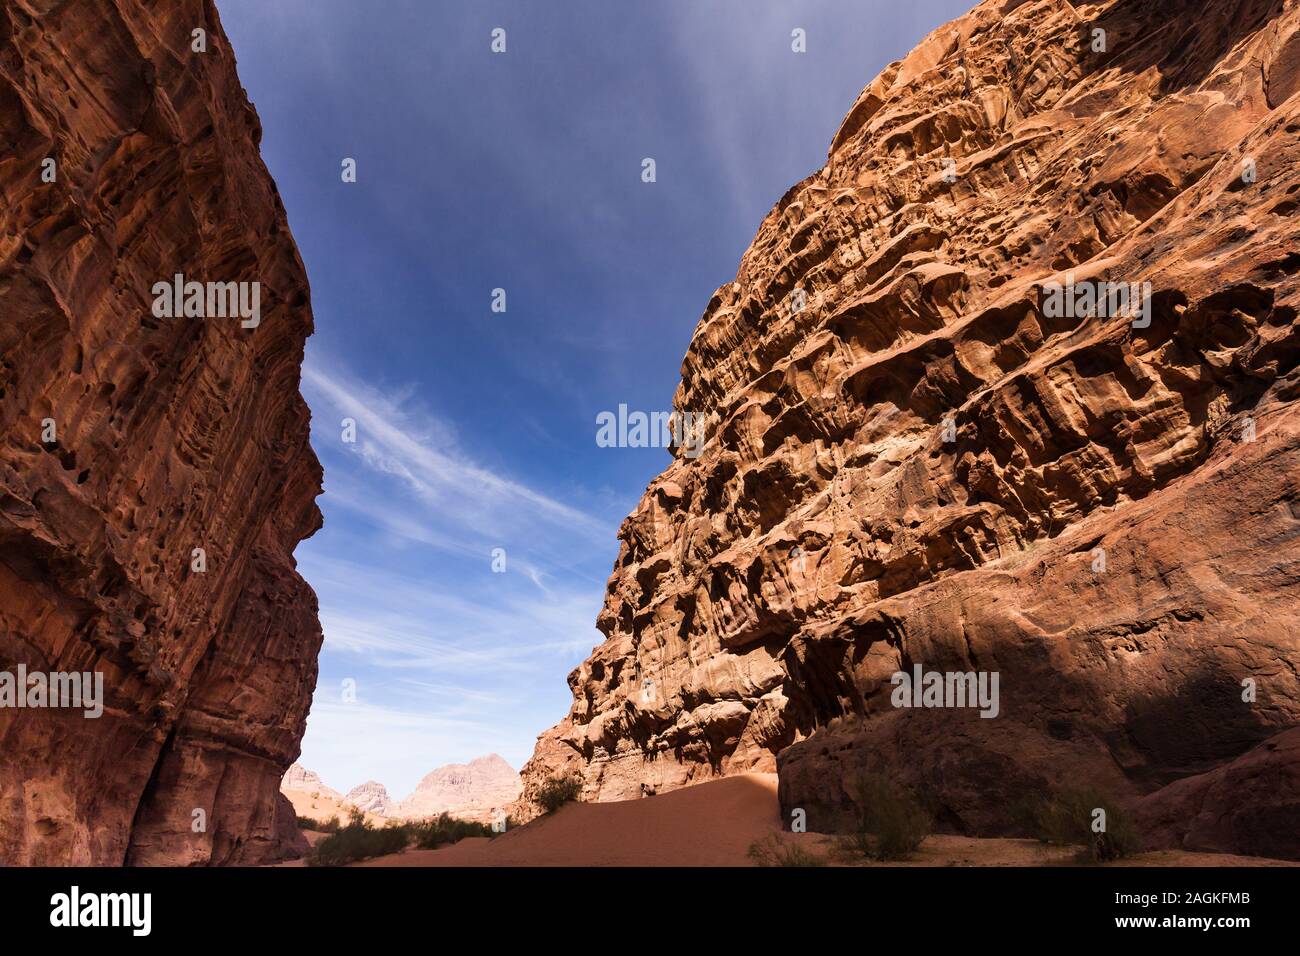 Wadi Rum, natural eroded gorge in desert, and view of eroded rocky cliff, Jordan, middle east, Asia Stock Photo